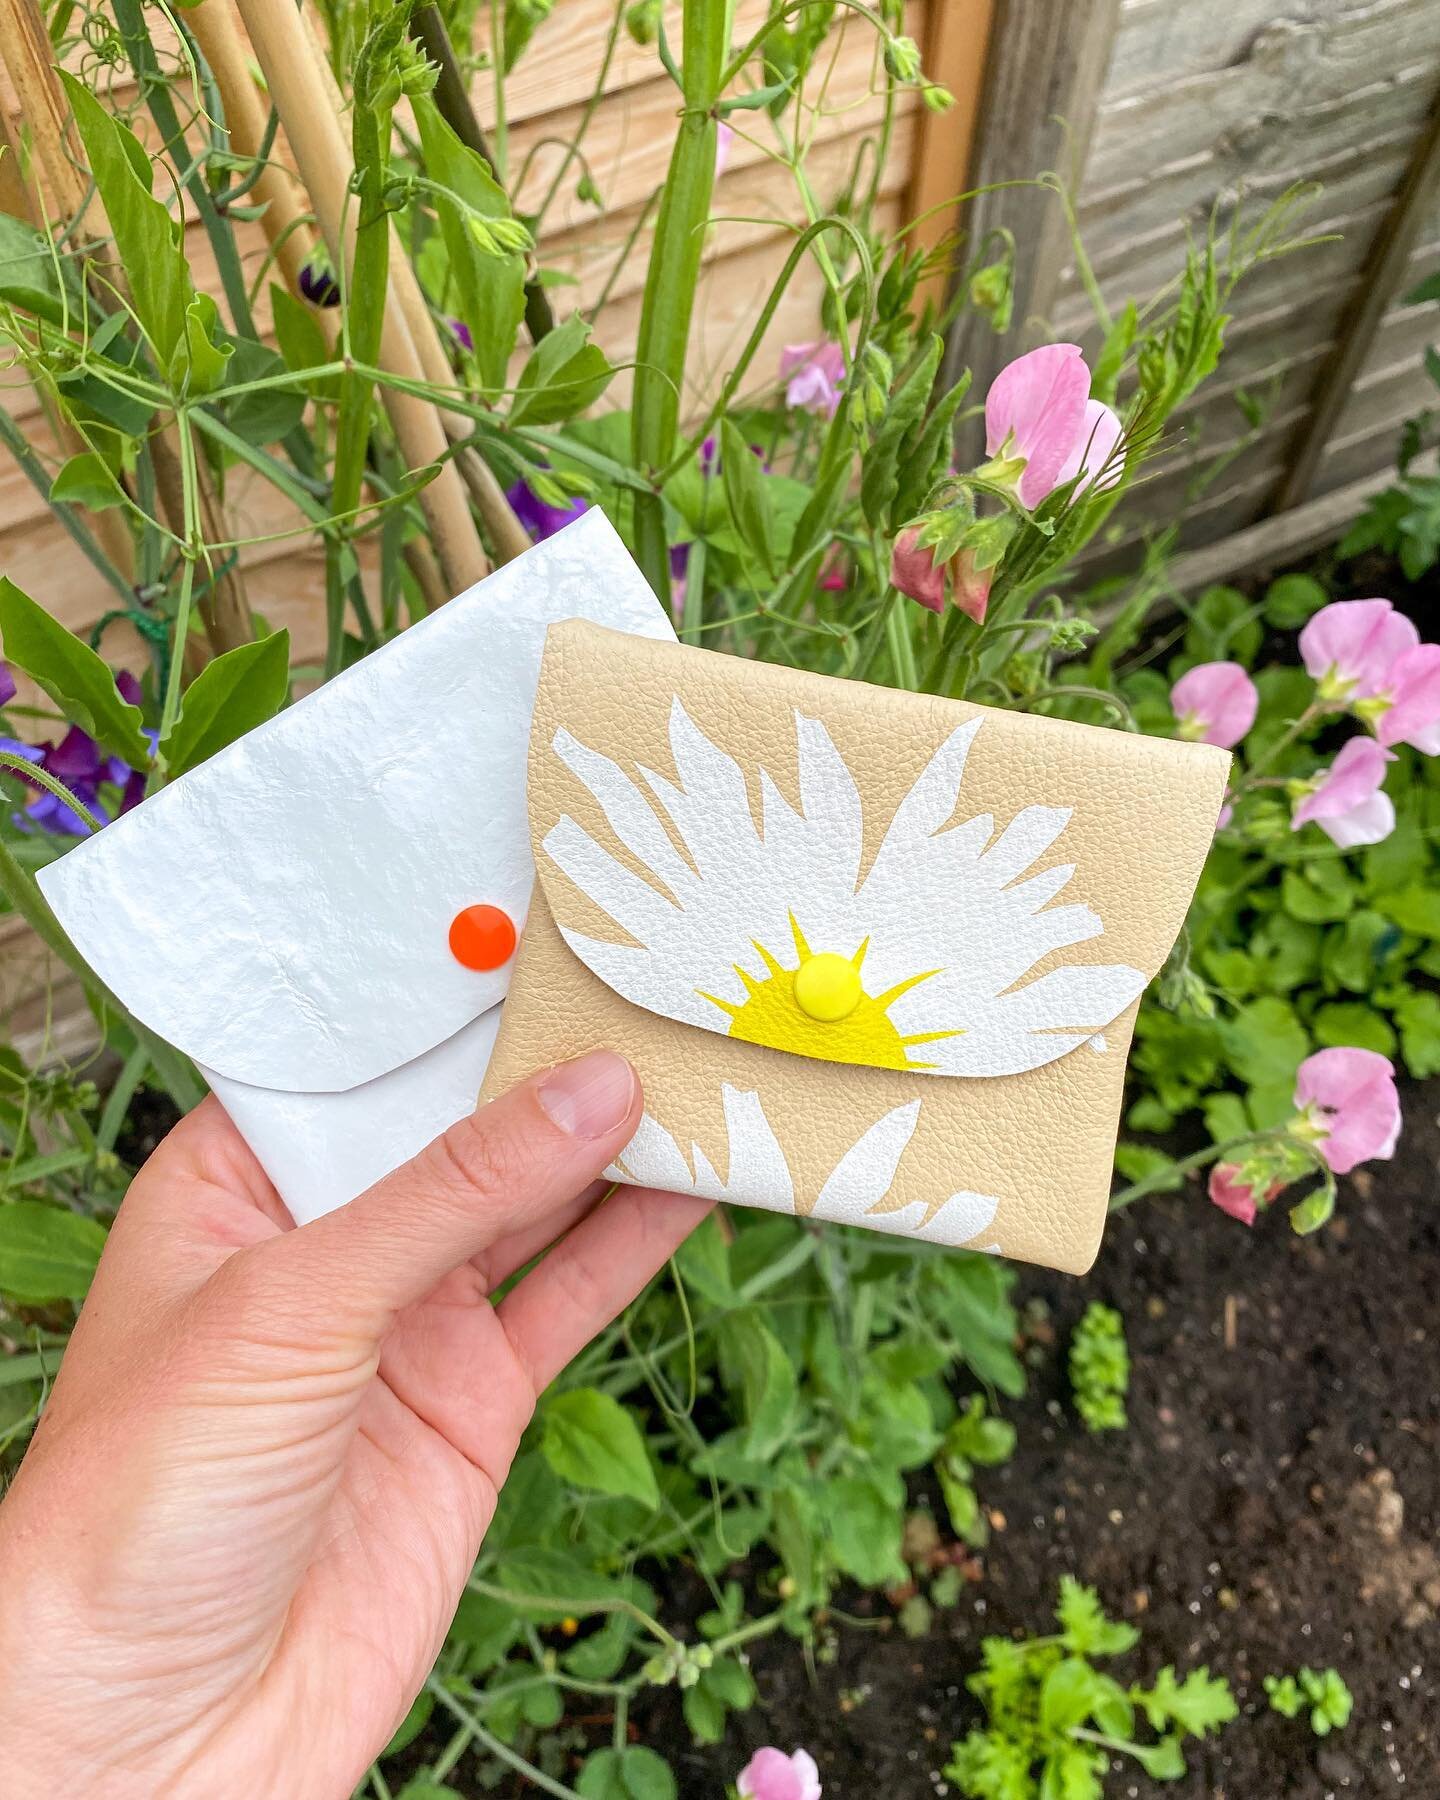 Perfect colour combo of leather coin purses flying the nest today 👋🏼 

#handprinted #leather #coinpurses #jennysibthorp #buyhandmade #shopindependent #daisy #yellow #orange #botanicaldesign #floralprint #sweetpeas #gardenshot 

(and yes I am proud 